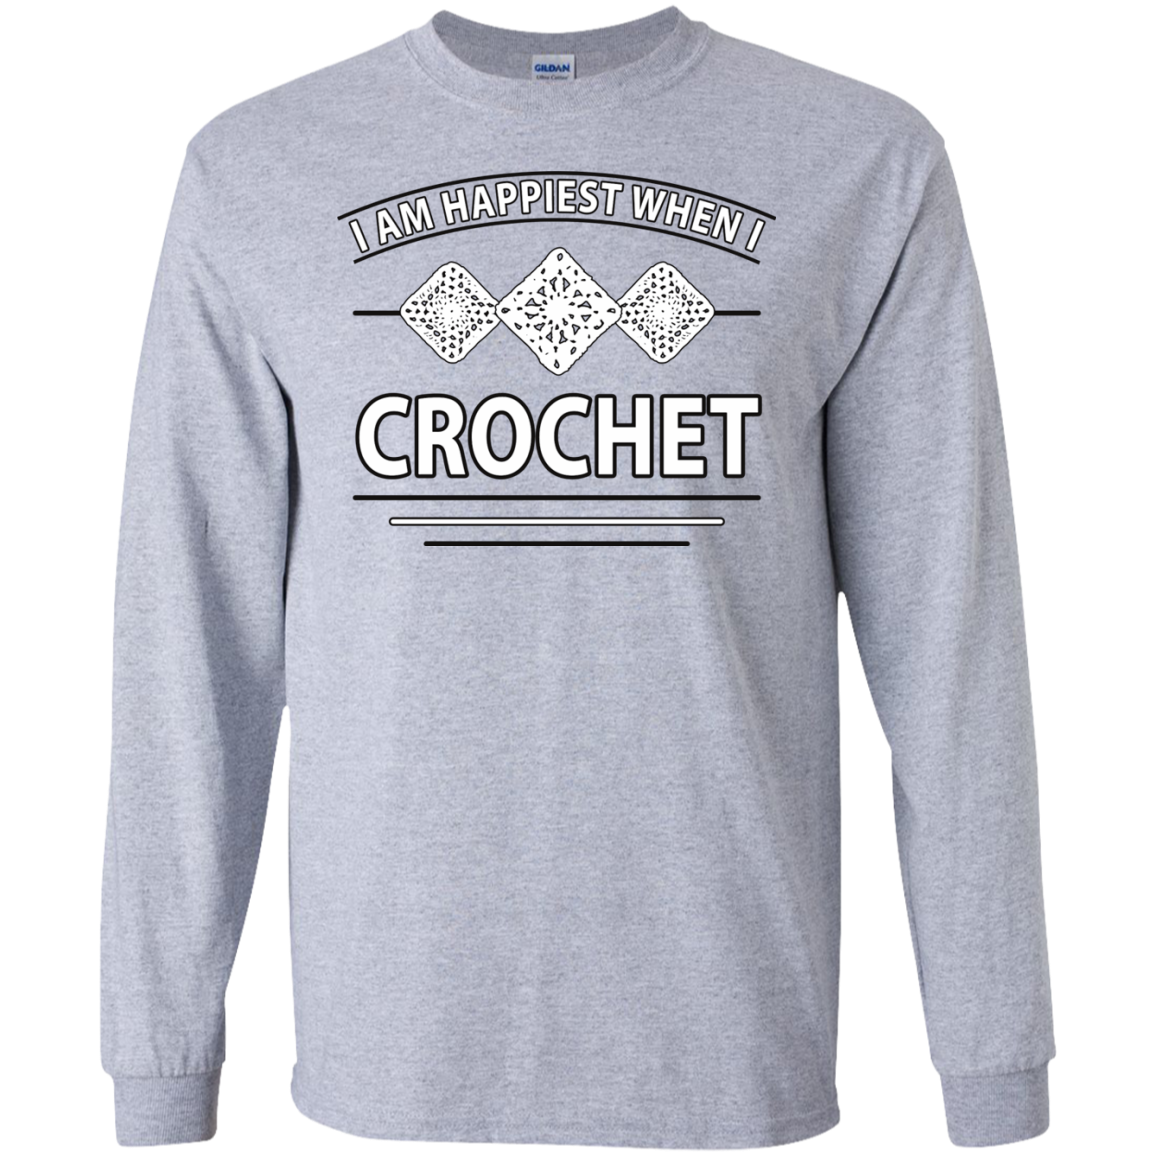 I Am Happiest When I Crochet Long Sleeve Ultra Cotton T-shirt - Crafter4Life - 3